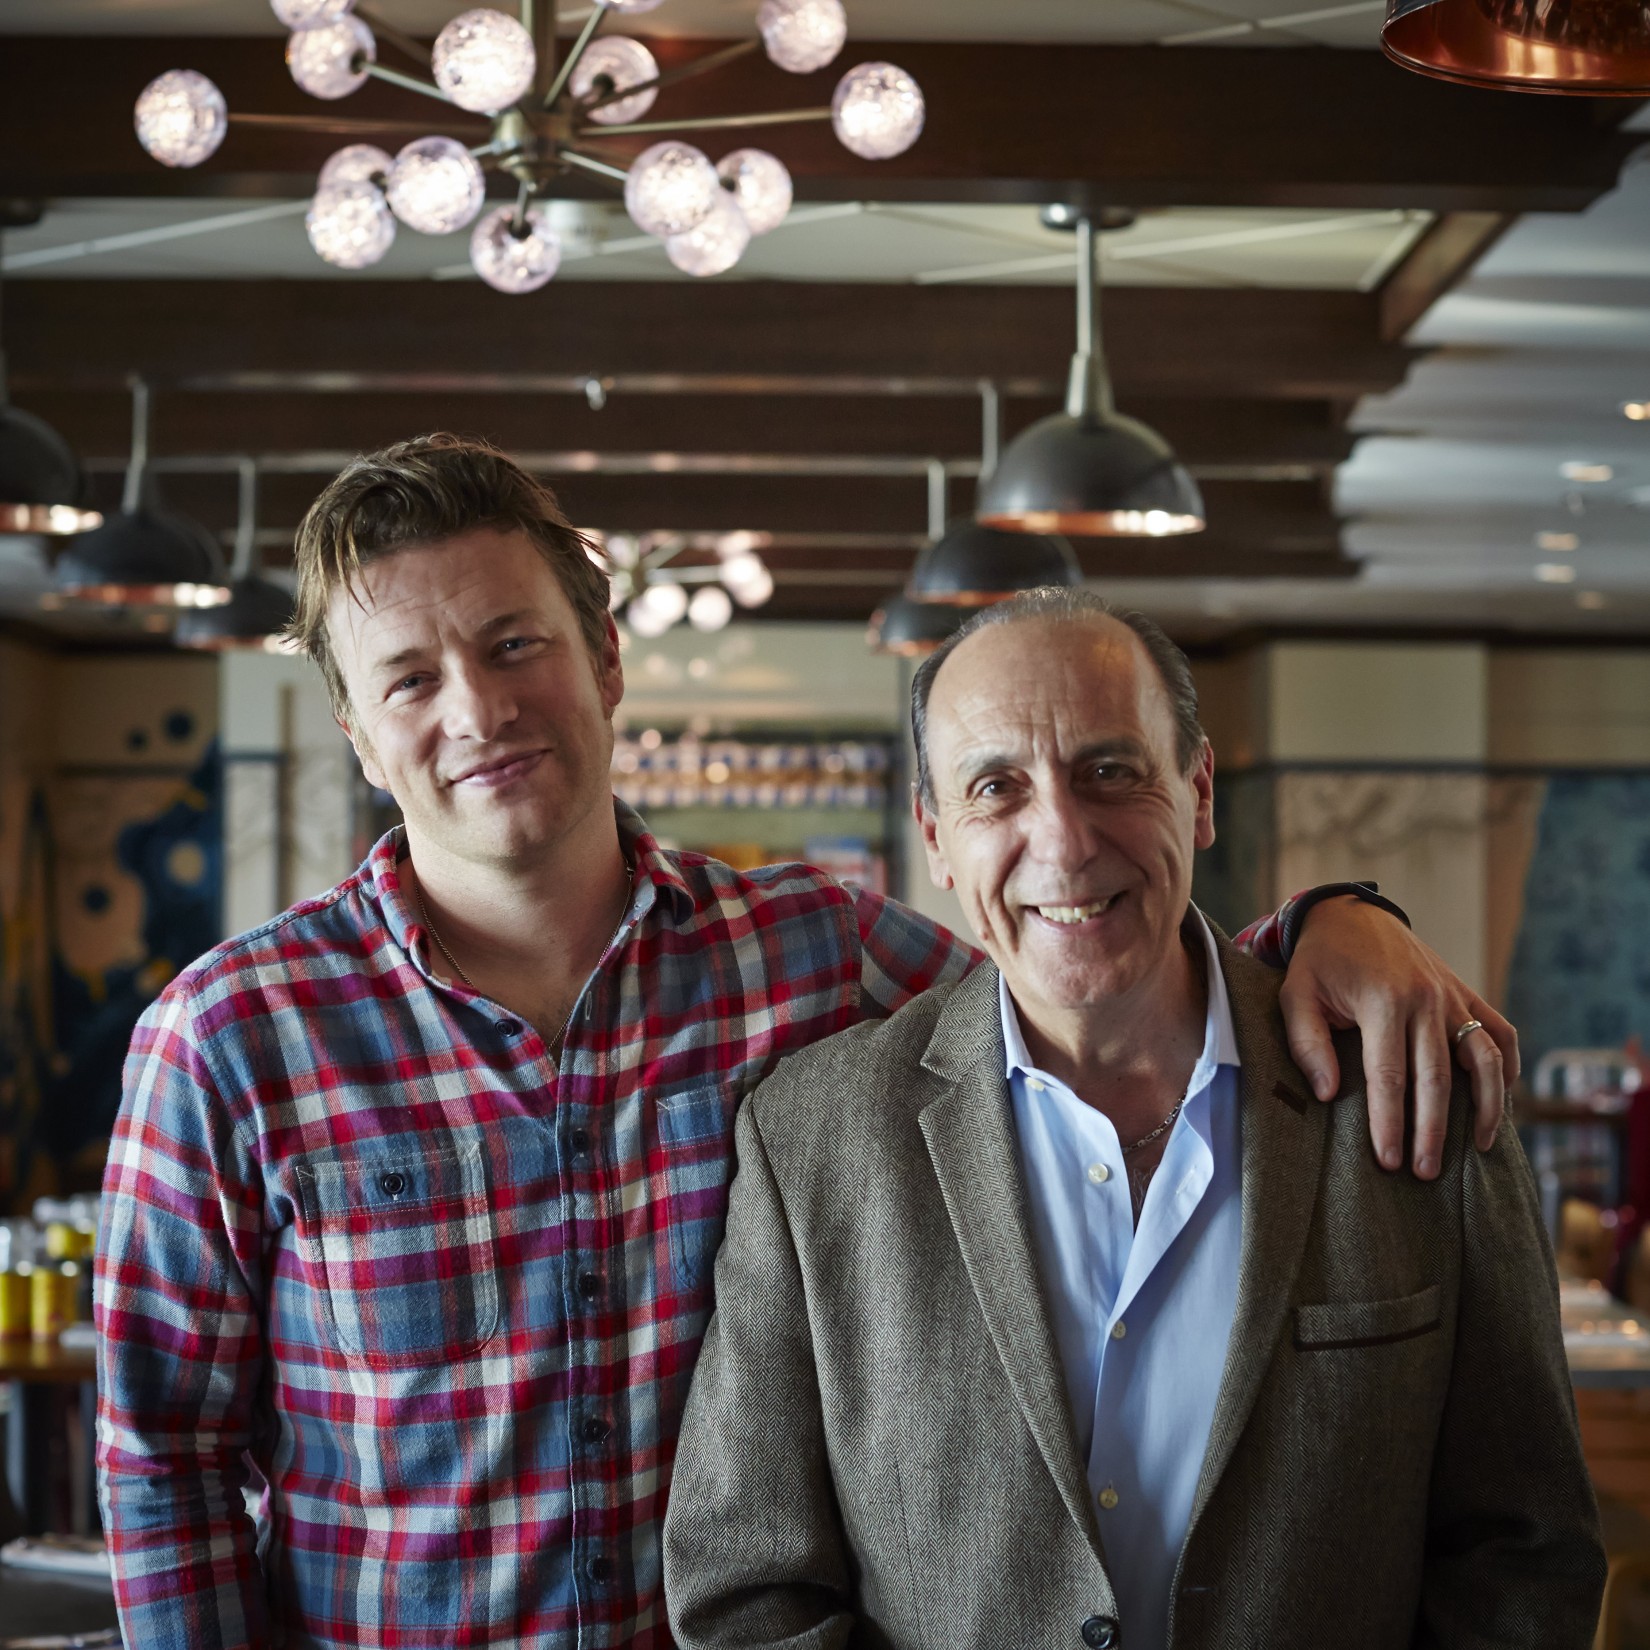 As Quantum of the Seas readied for her maiden voyage, Jamie Oliver (right) and his mentor and partner Gennaro Contaldo met with the Jamie’s Italian kitchen staff and toured the ship.